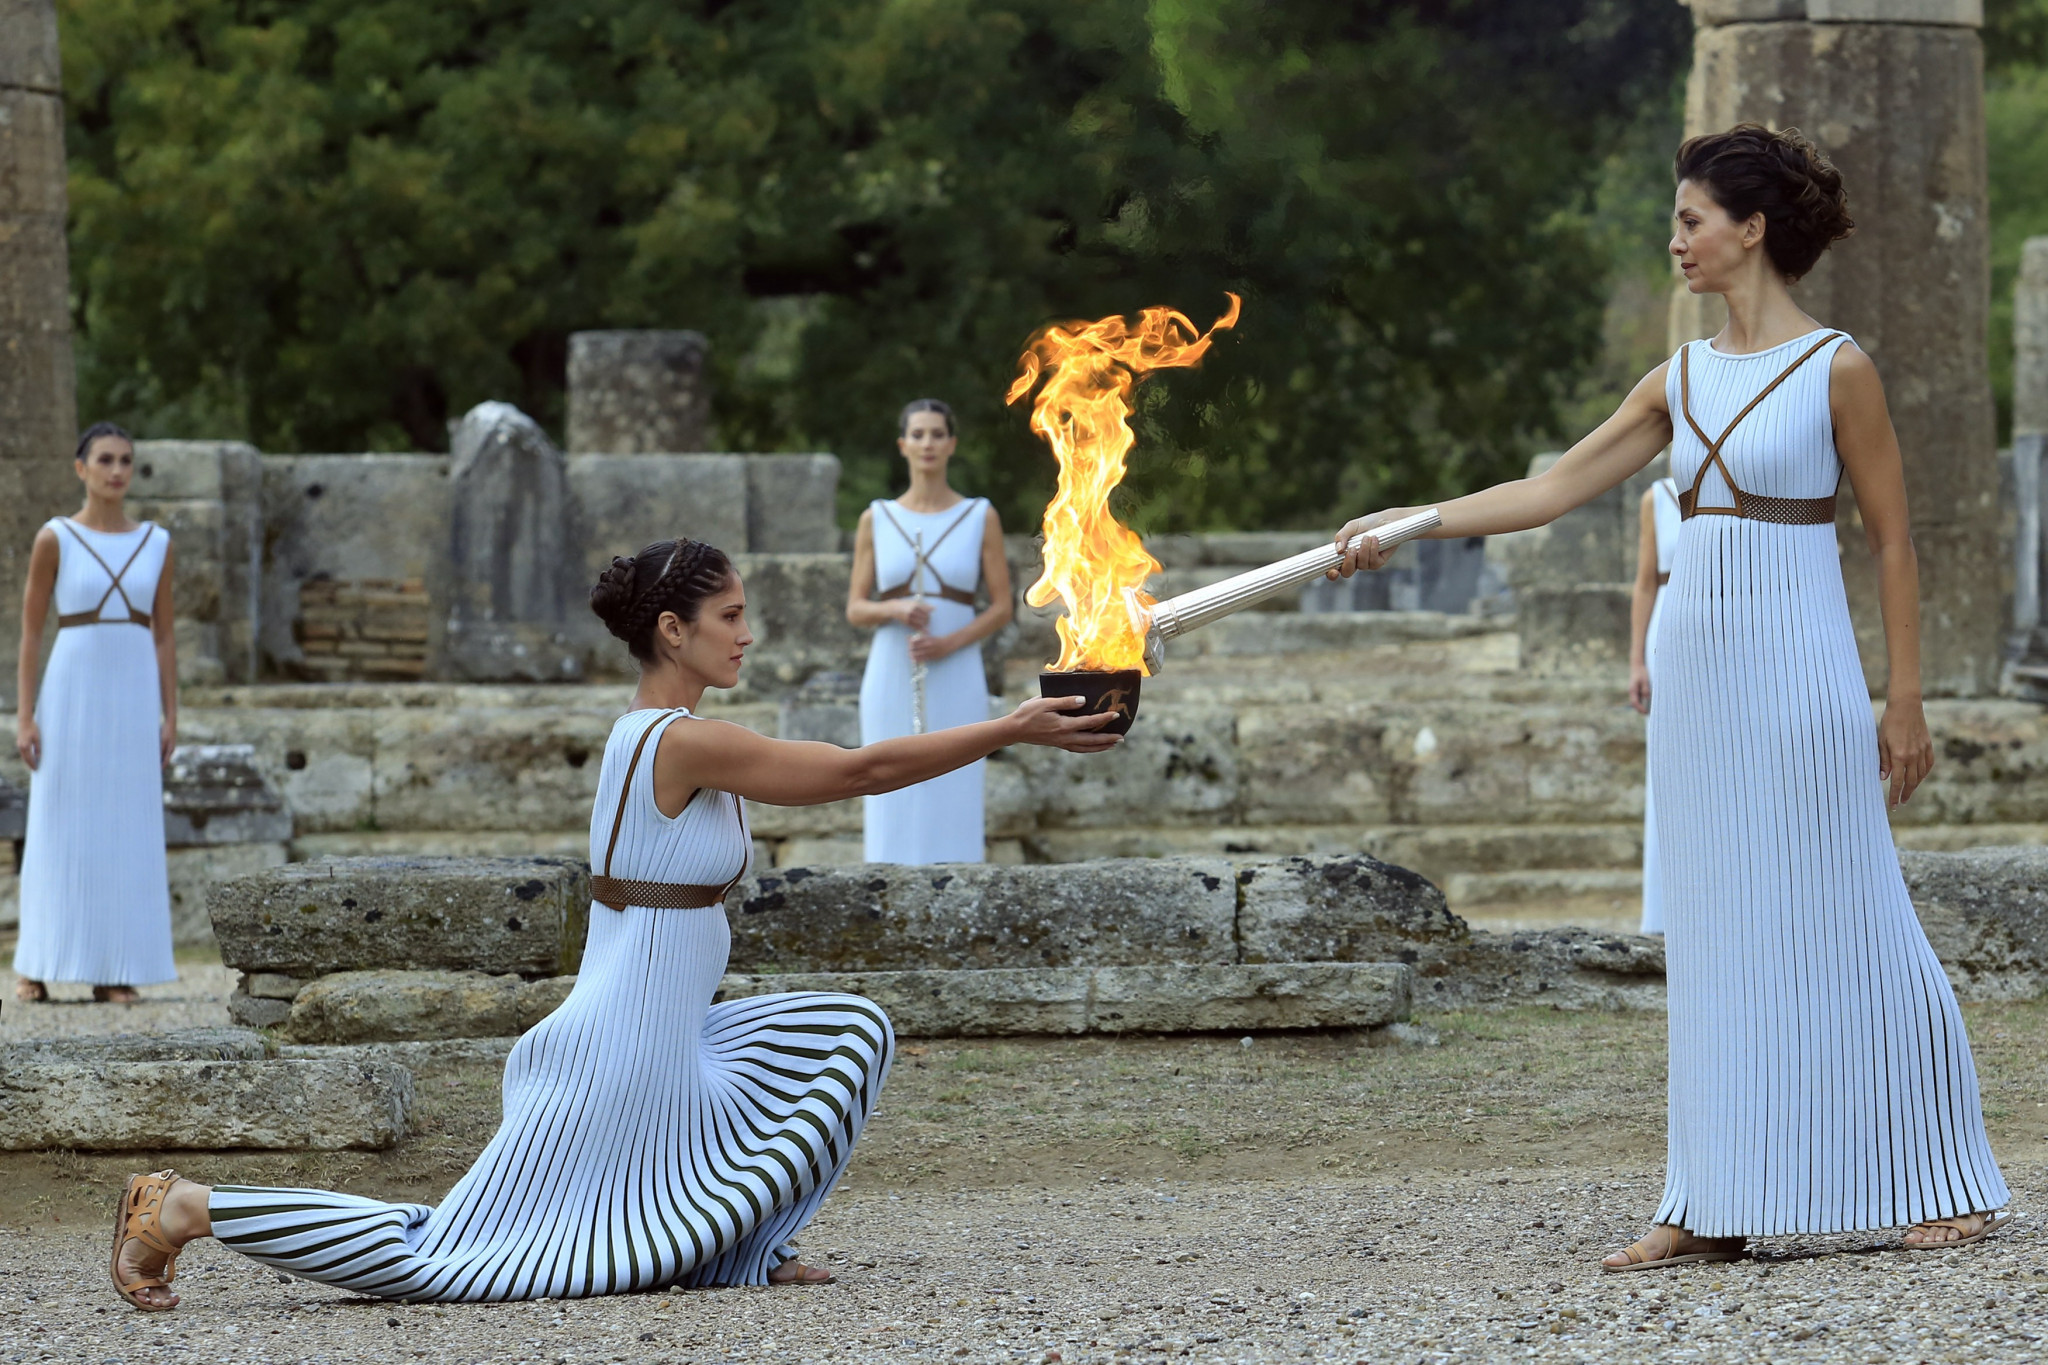 Pyeongchang 2018 Olympic Torch lit in Ancient Olympia